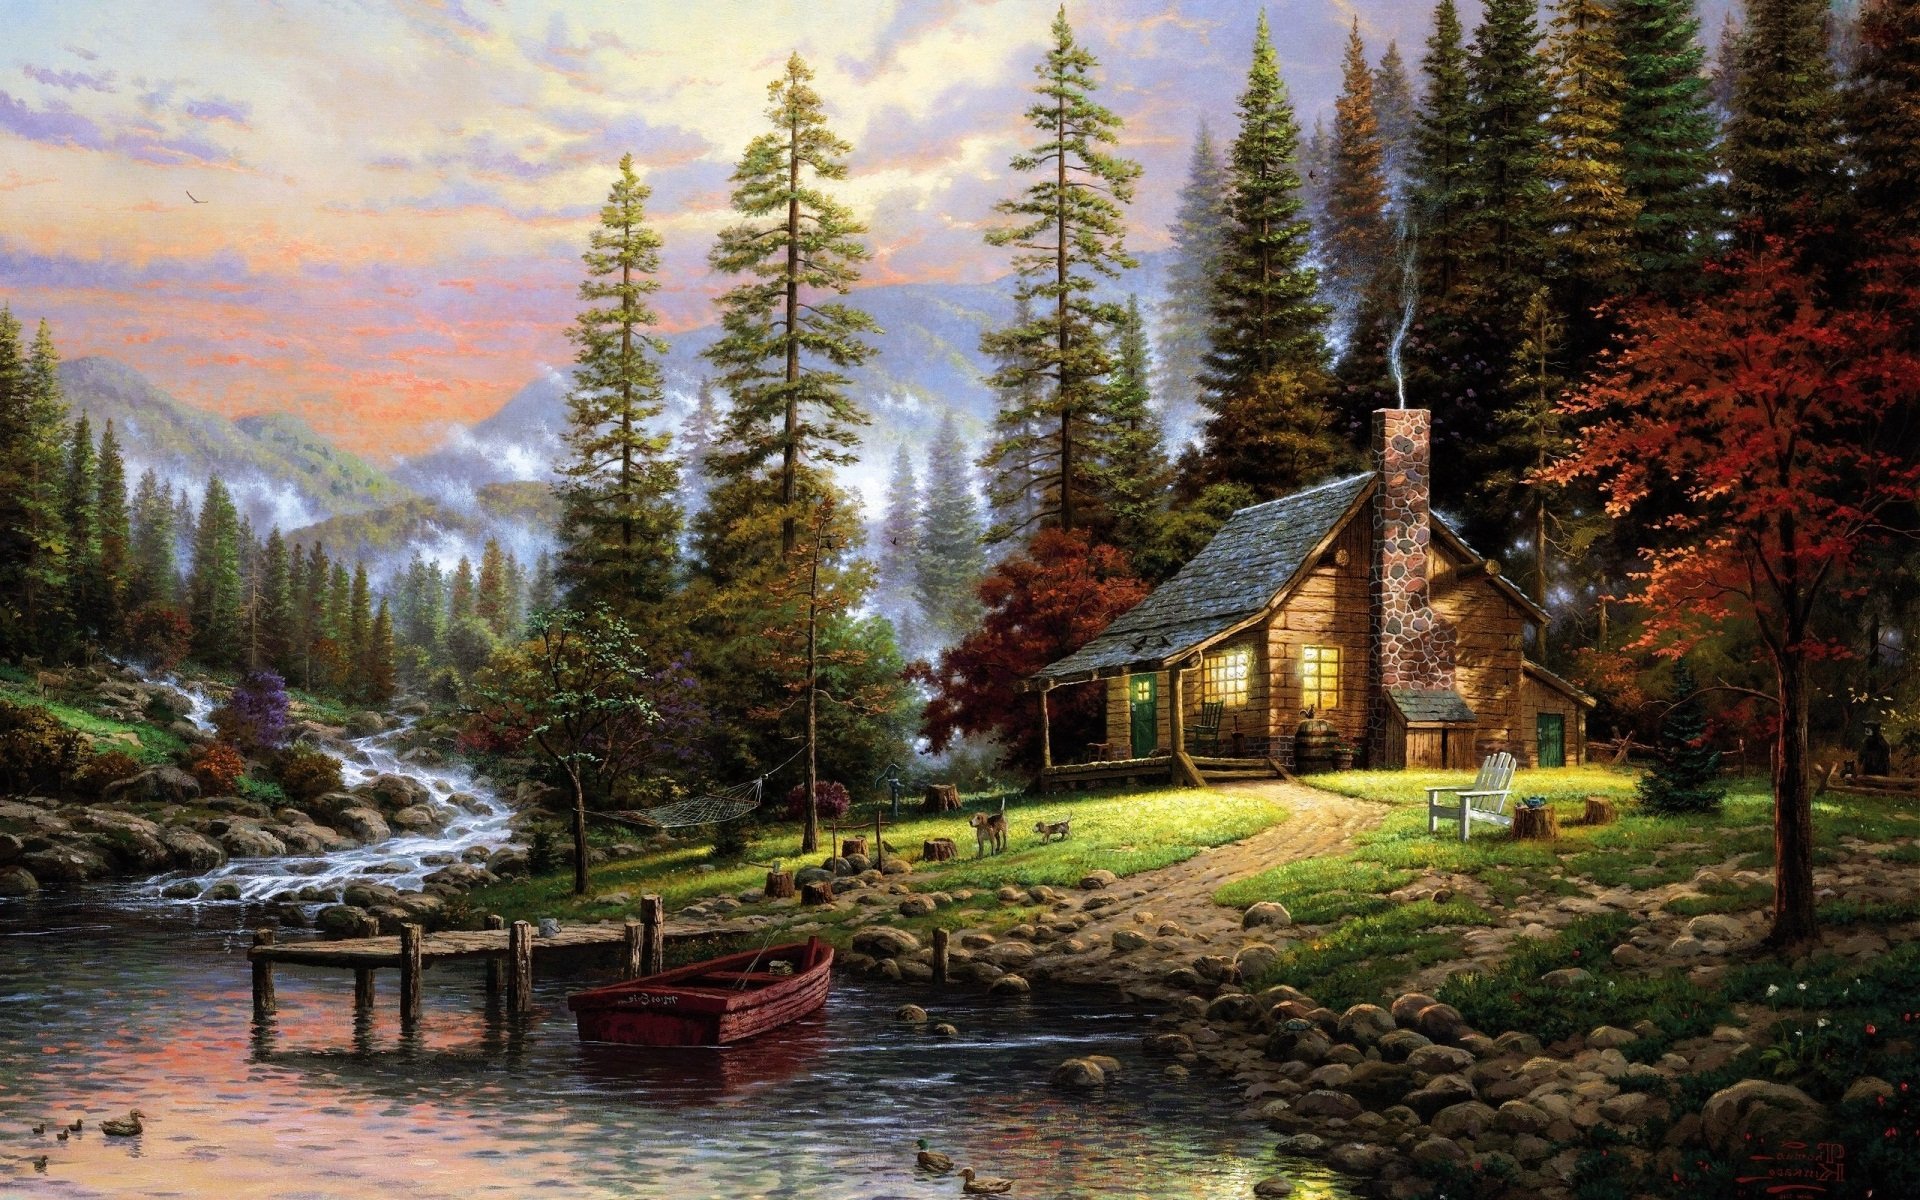  September 3 2015 By Stephen Comments Off on Mountain Cabin Wallpapers